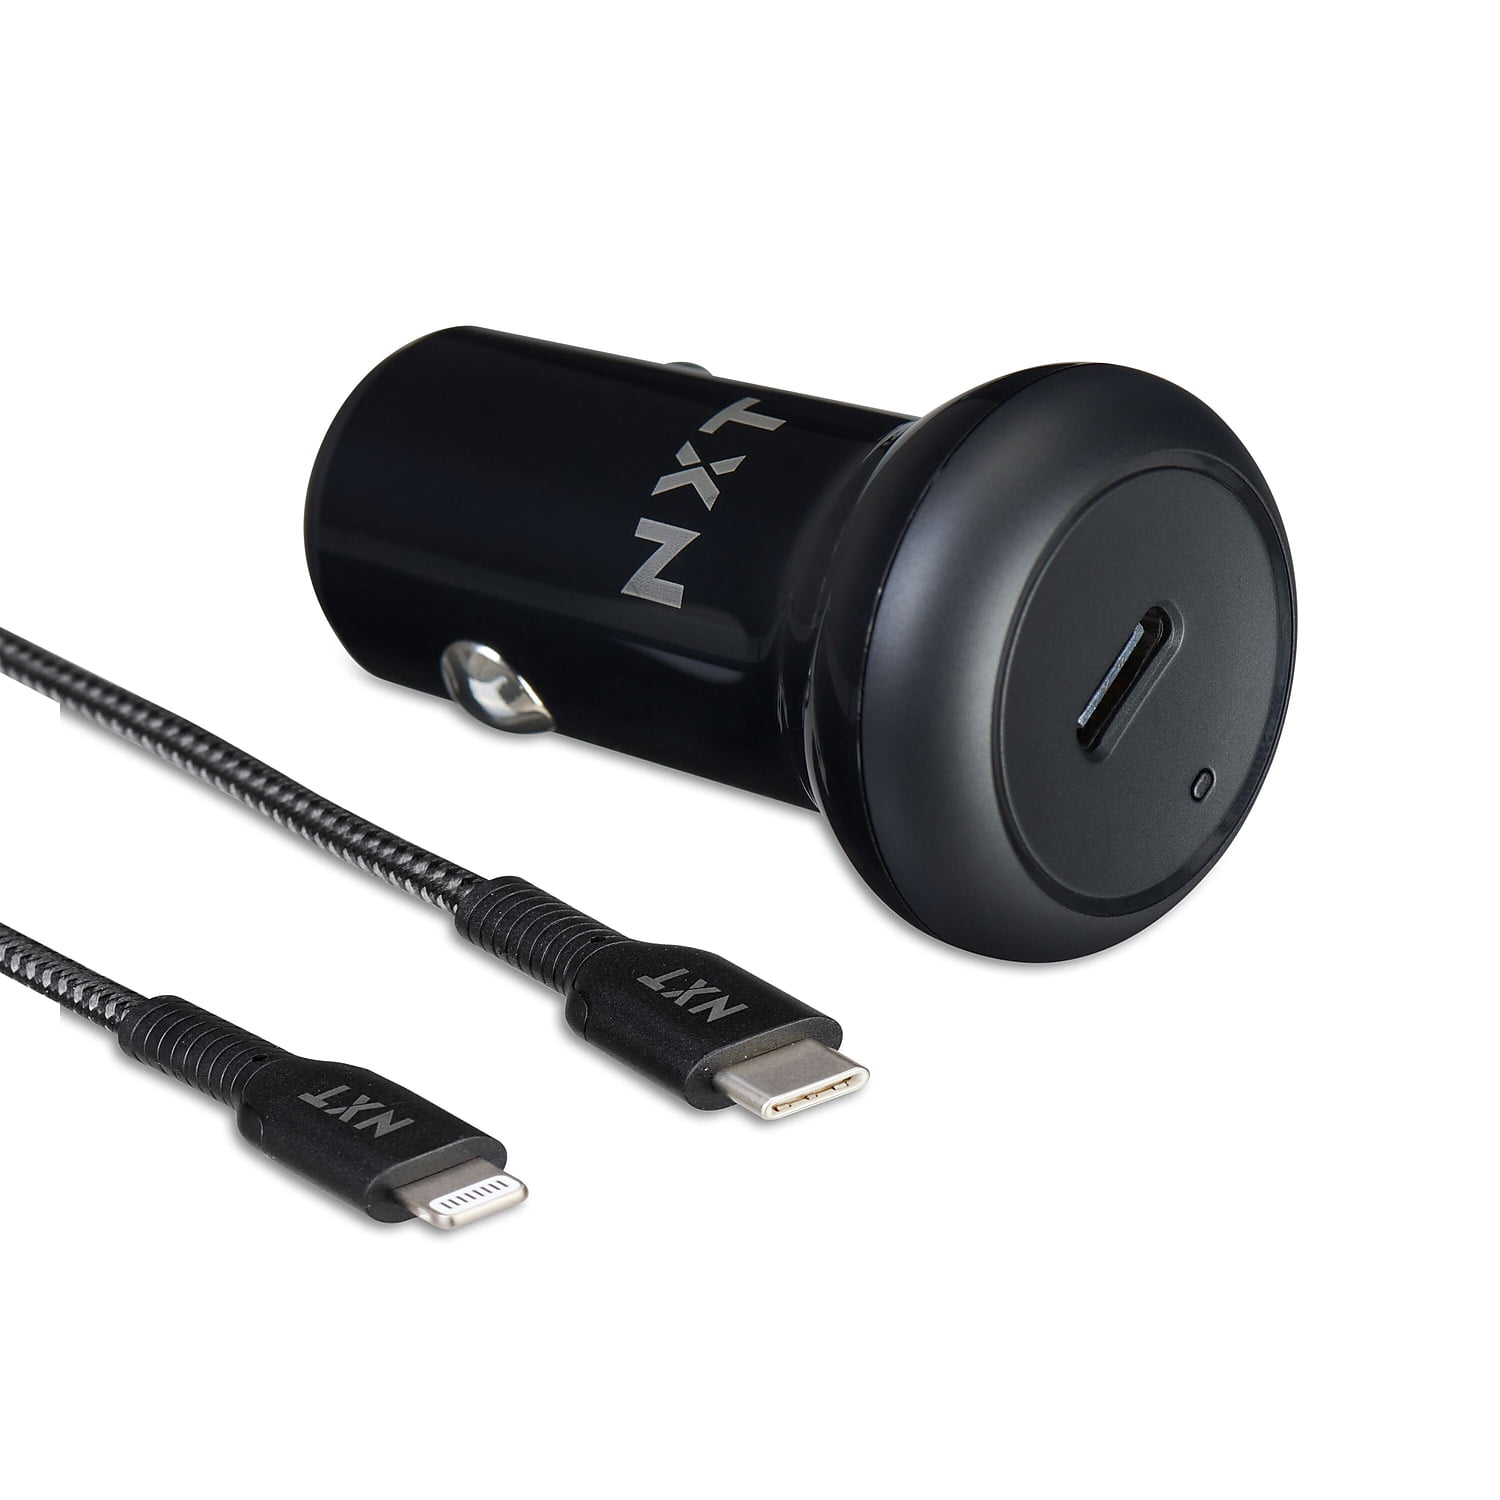 NXT Technologies USB-C Car Charger with Lightning Cable for iPhone/iPad Black (nx60451)